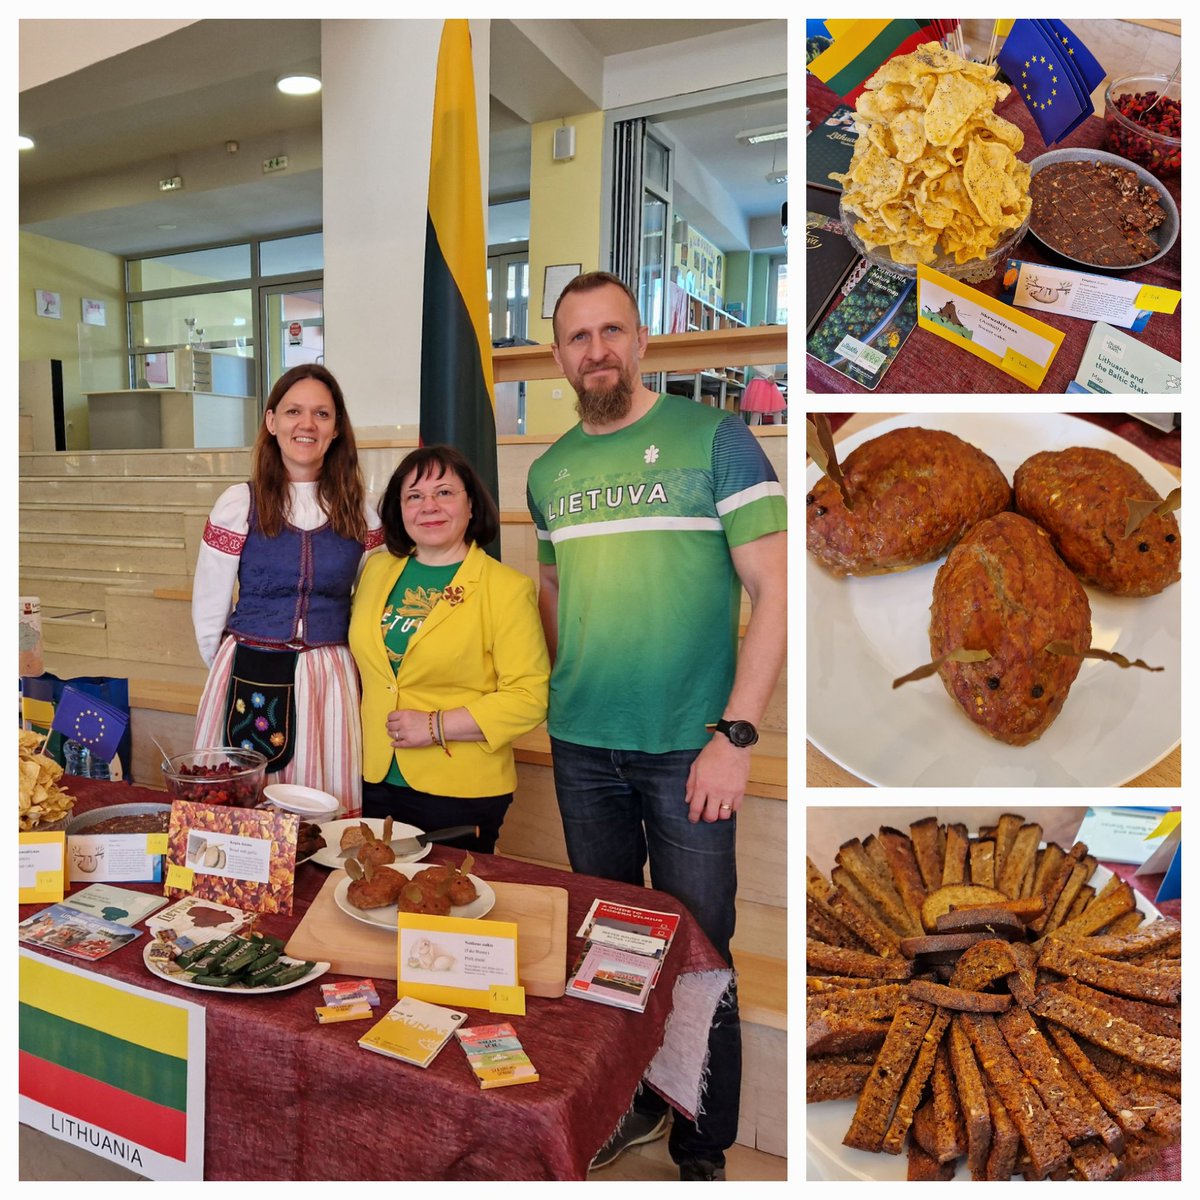 🇱🇹Lithuanian culinary heritage through home cooking traditions at Family Day, hosted by Nova International School in Skopje.  #LithuanianCuisine #FamilyDay #NovaInternationalSchoolSkopje